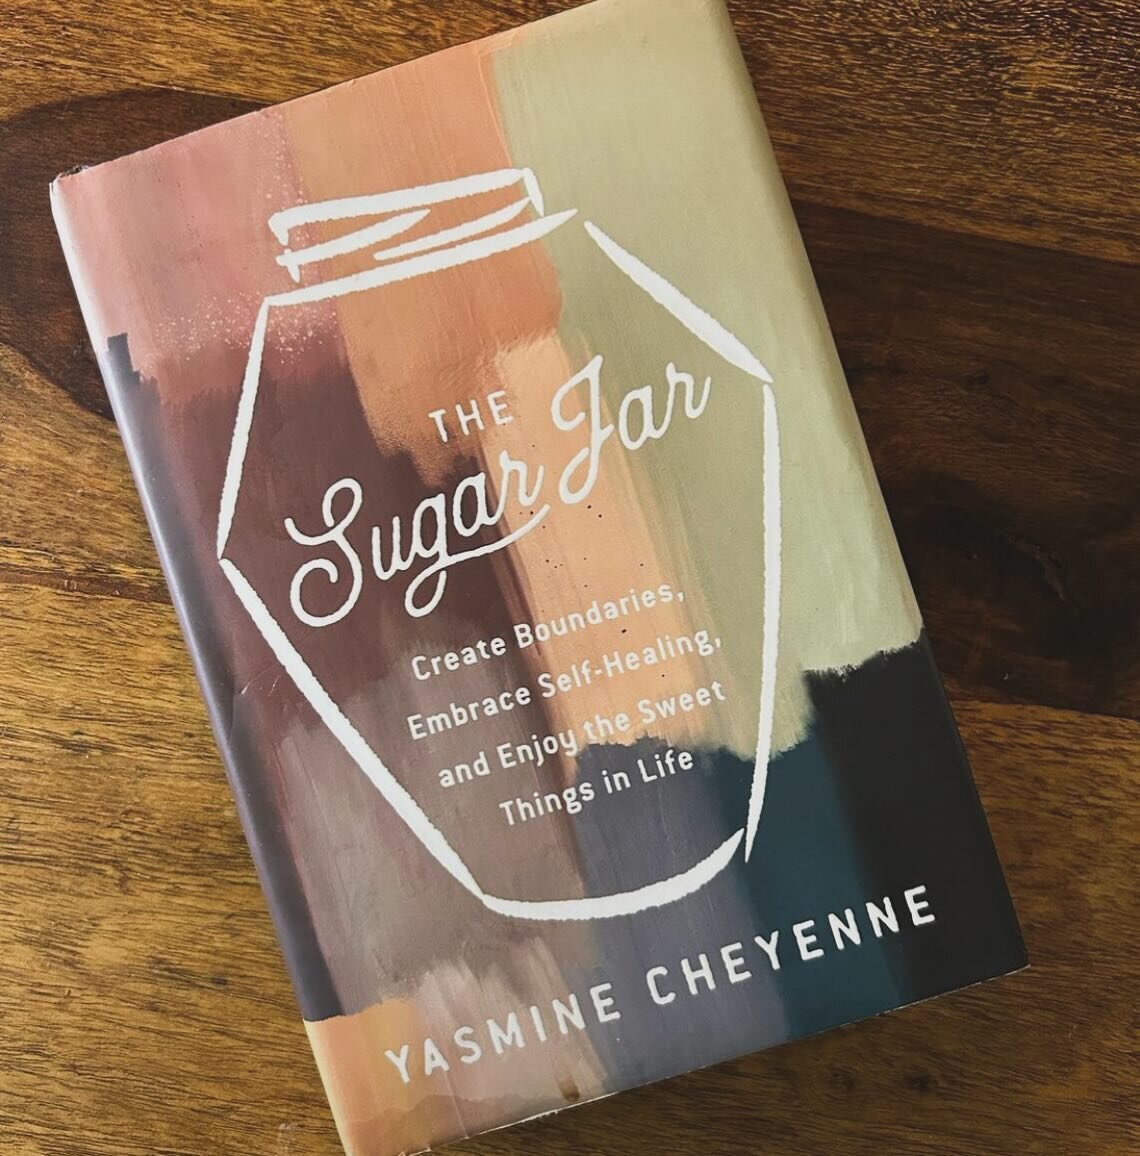 Happy New Year!🎊 

We like to ground our selves at the beginning of each year with a book that fills our cups&hellip; well jar in this case! Our January book will be Sugar Jar by @yasminecheyenne ! We will meet Jan 20th for annual vision board party